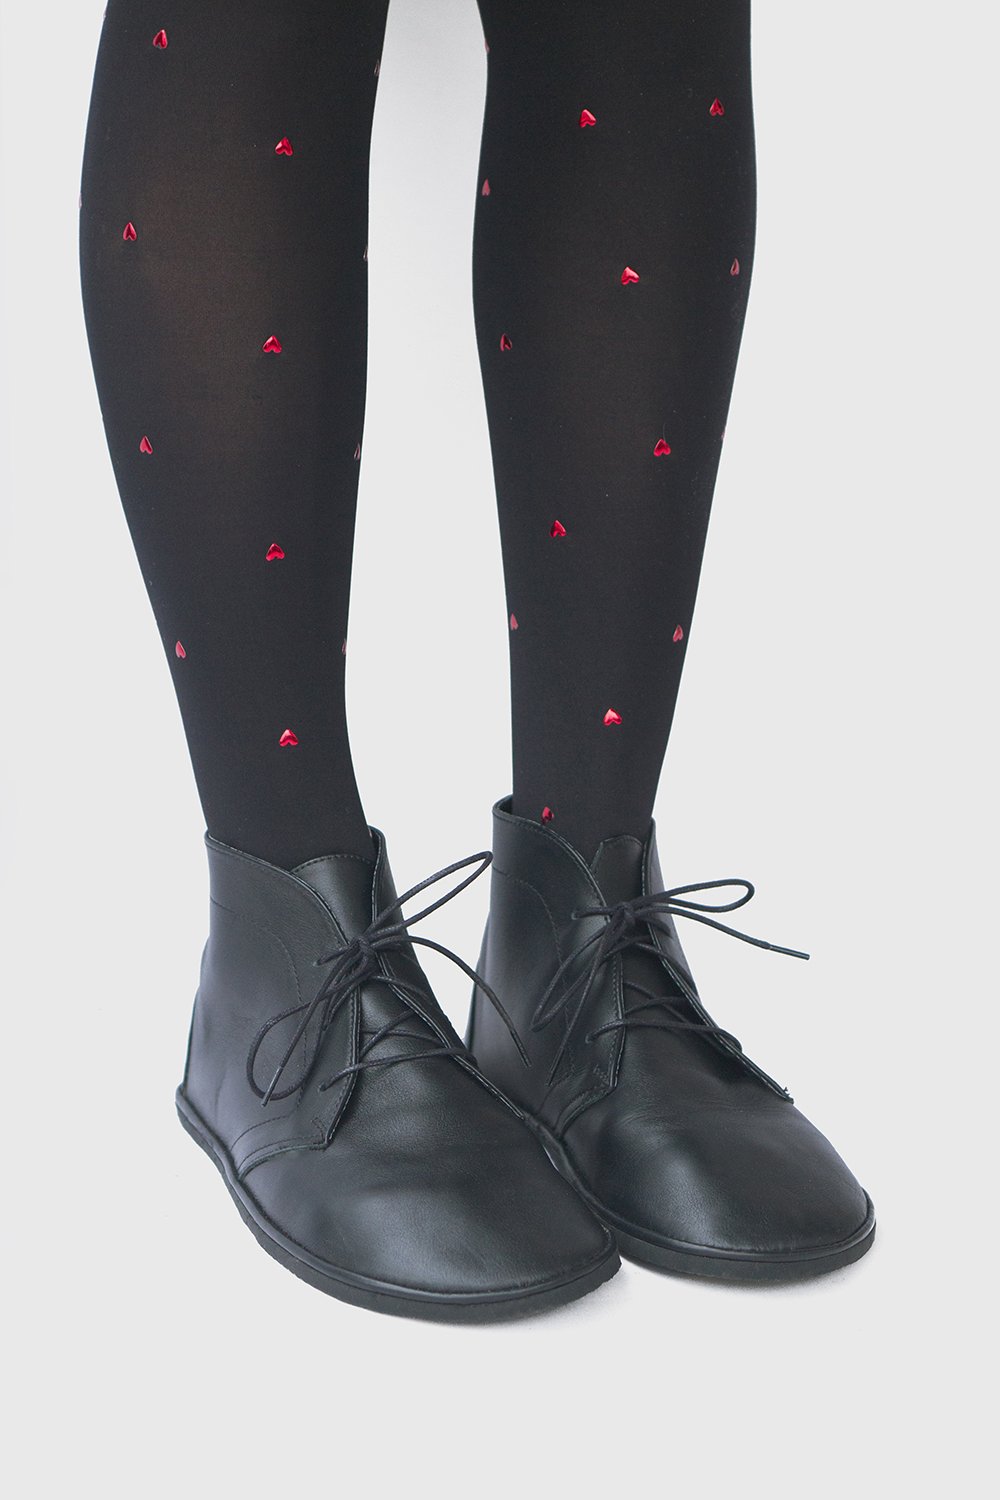 Image of Leona Boots in Matte Black